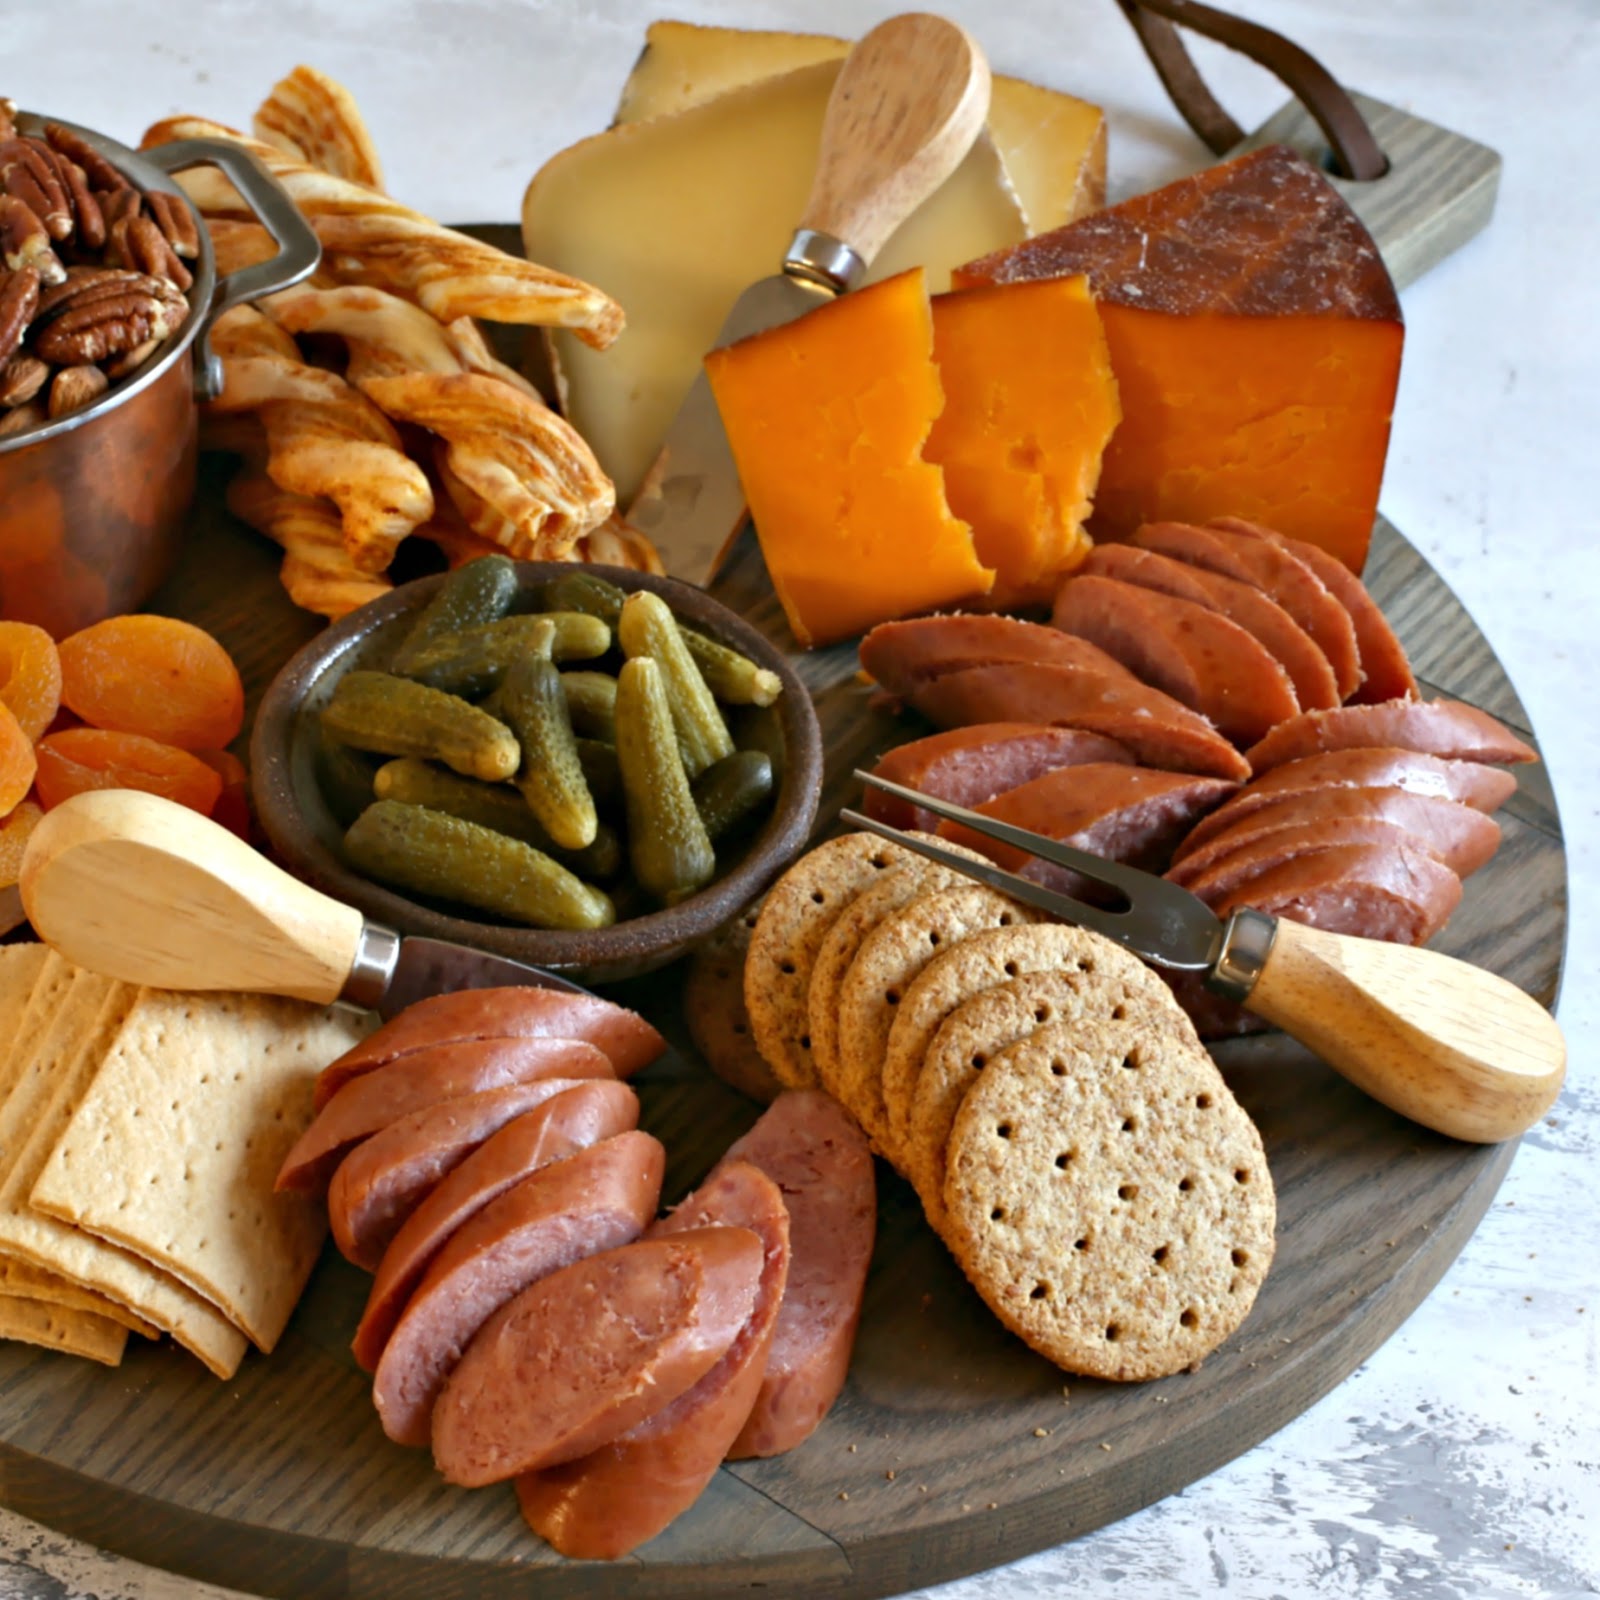 Recipe and instructions for putting together a holiday charcuterie board.